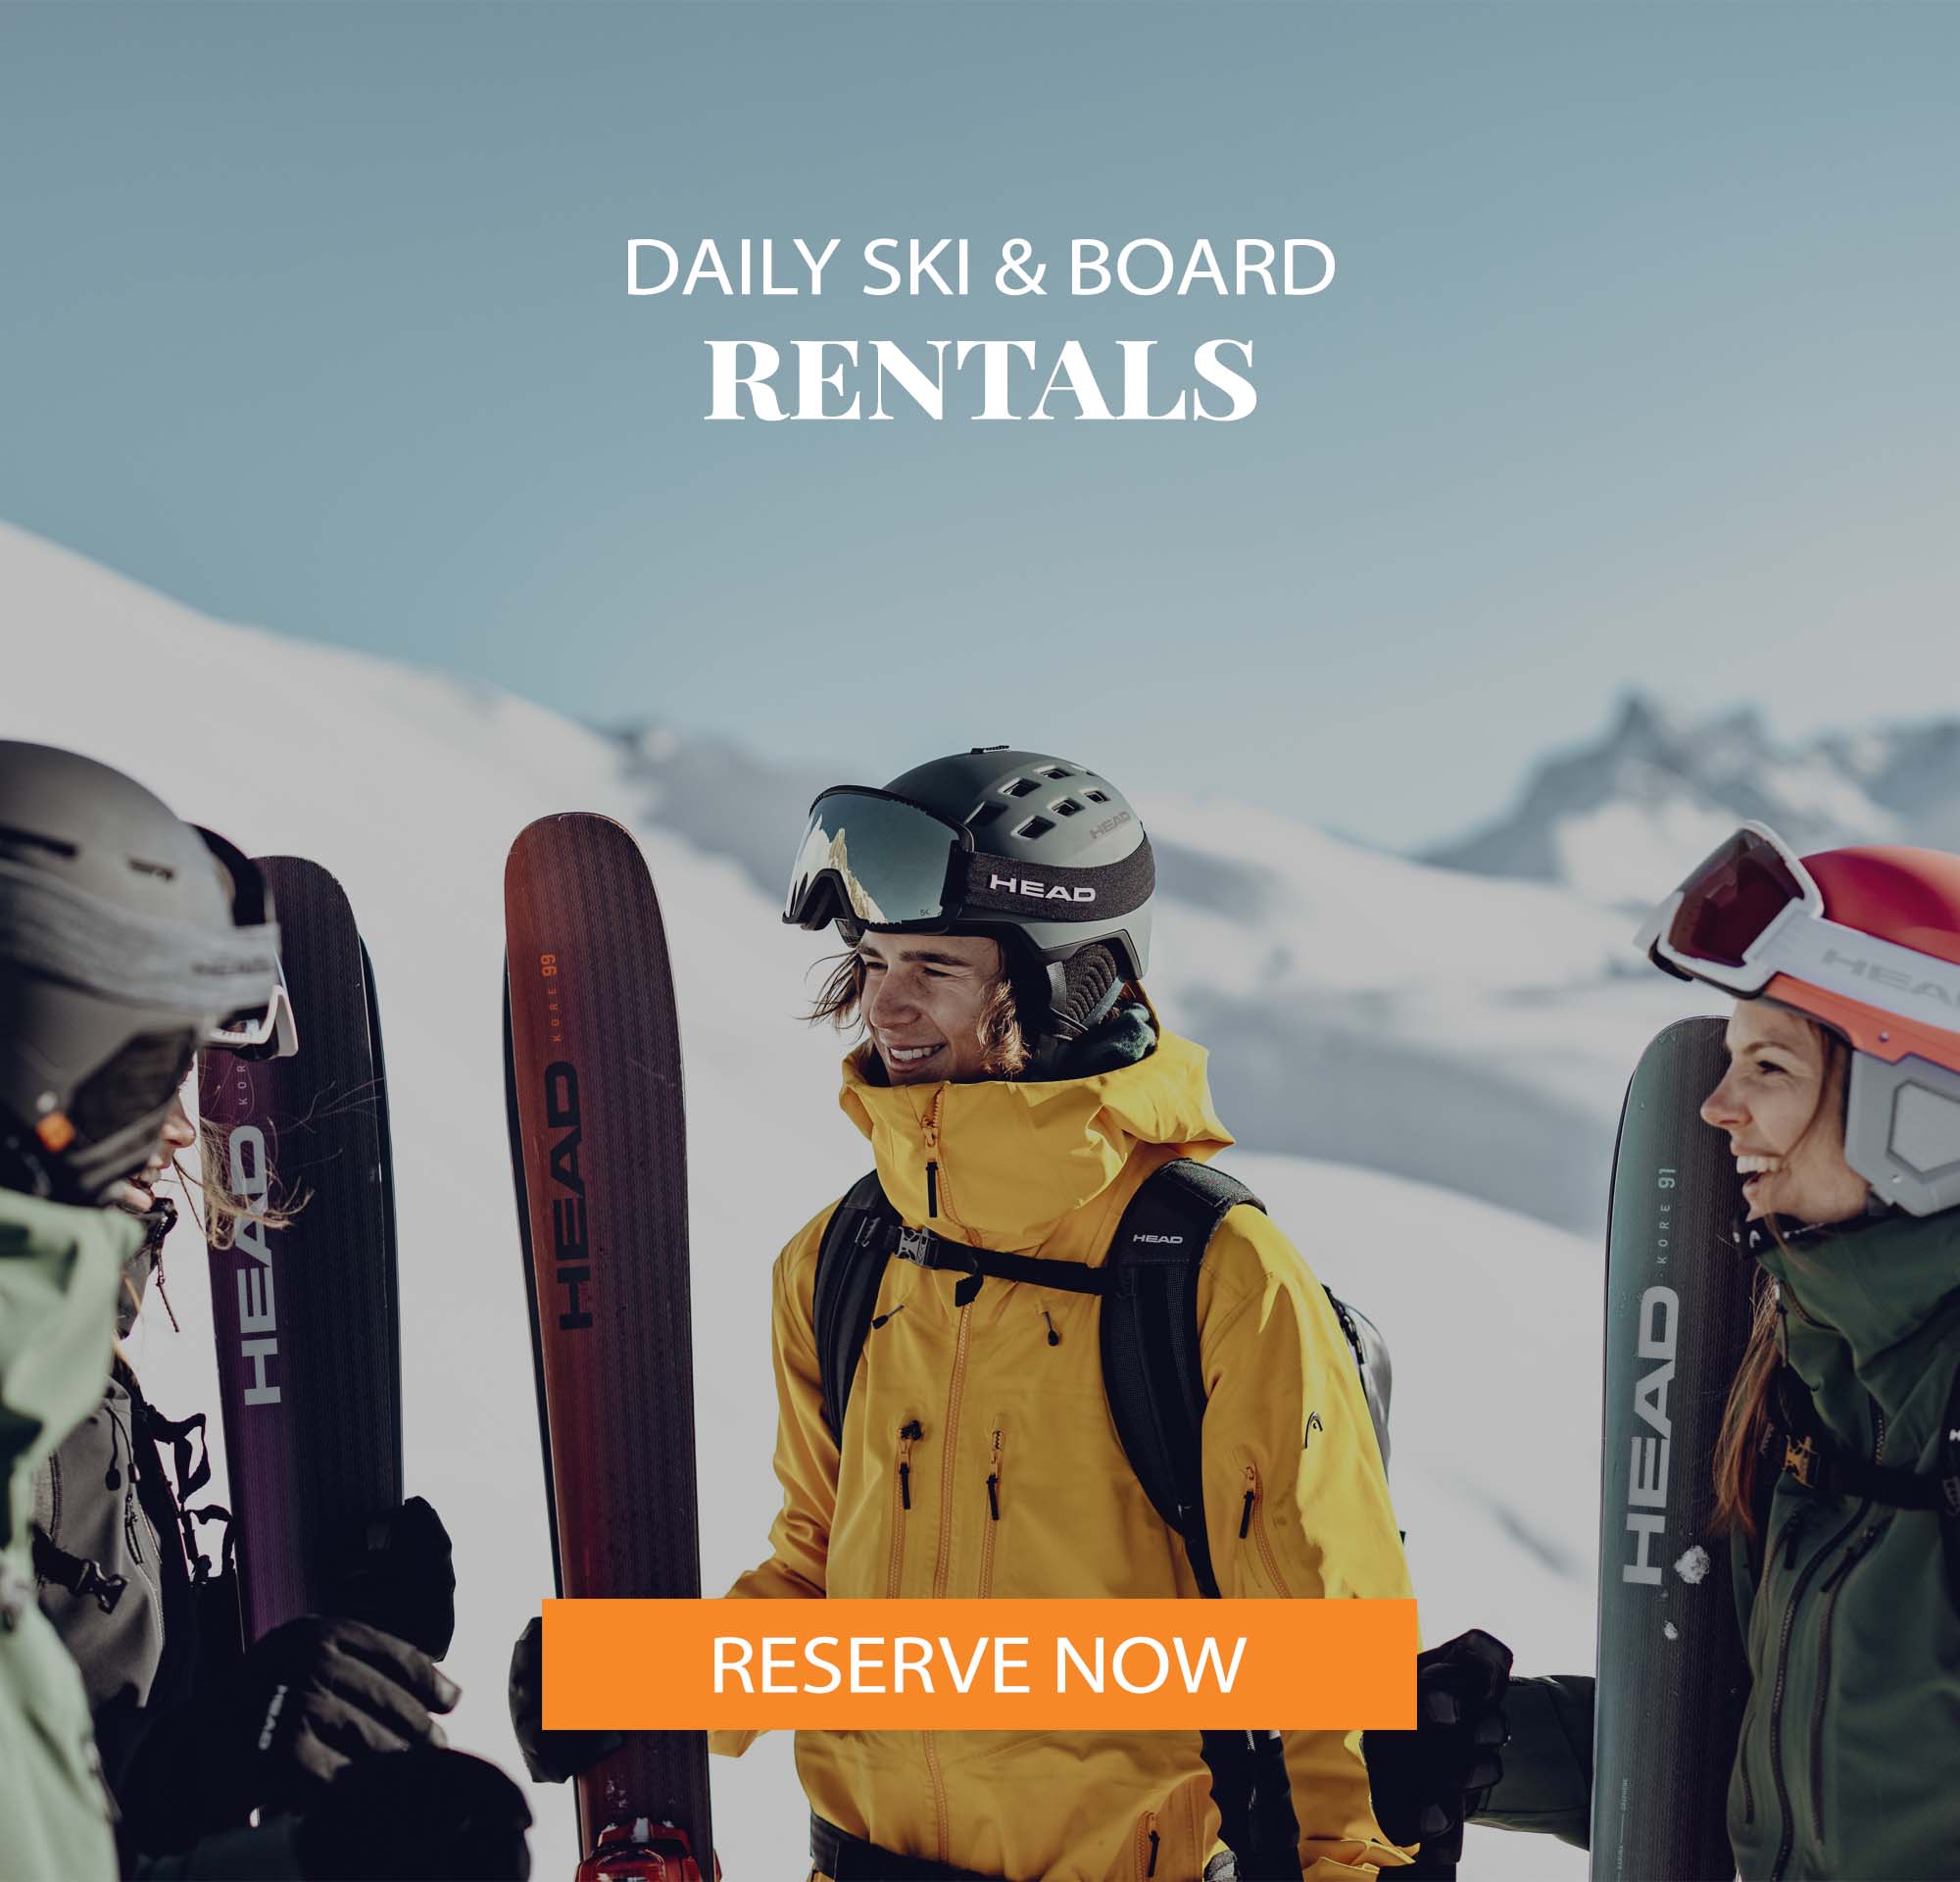 Daily ski and board rentals available now at BlueZone Sports. Reserve today!